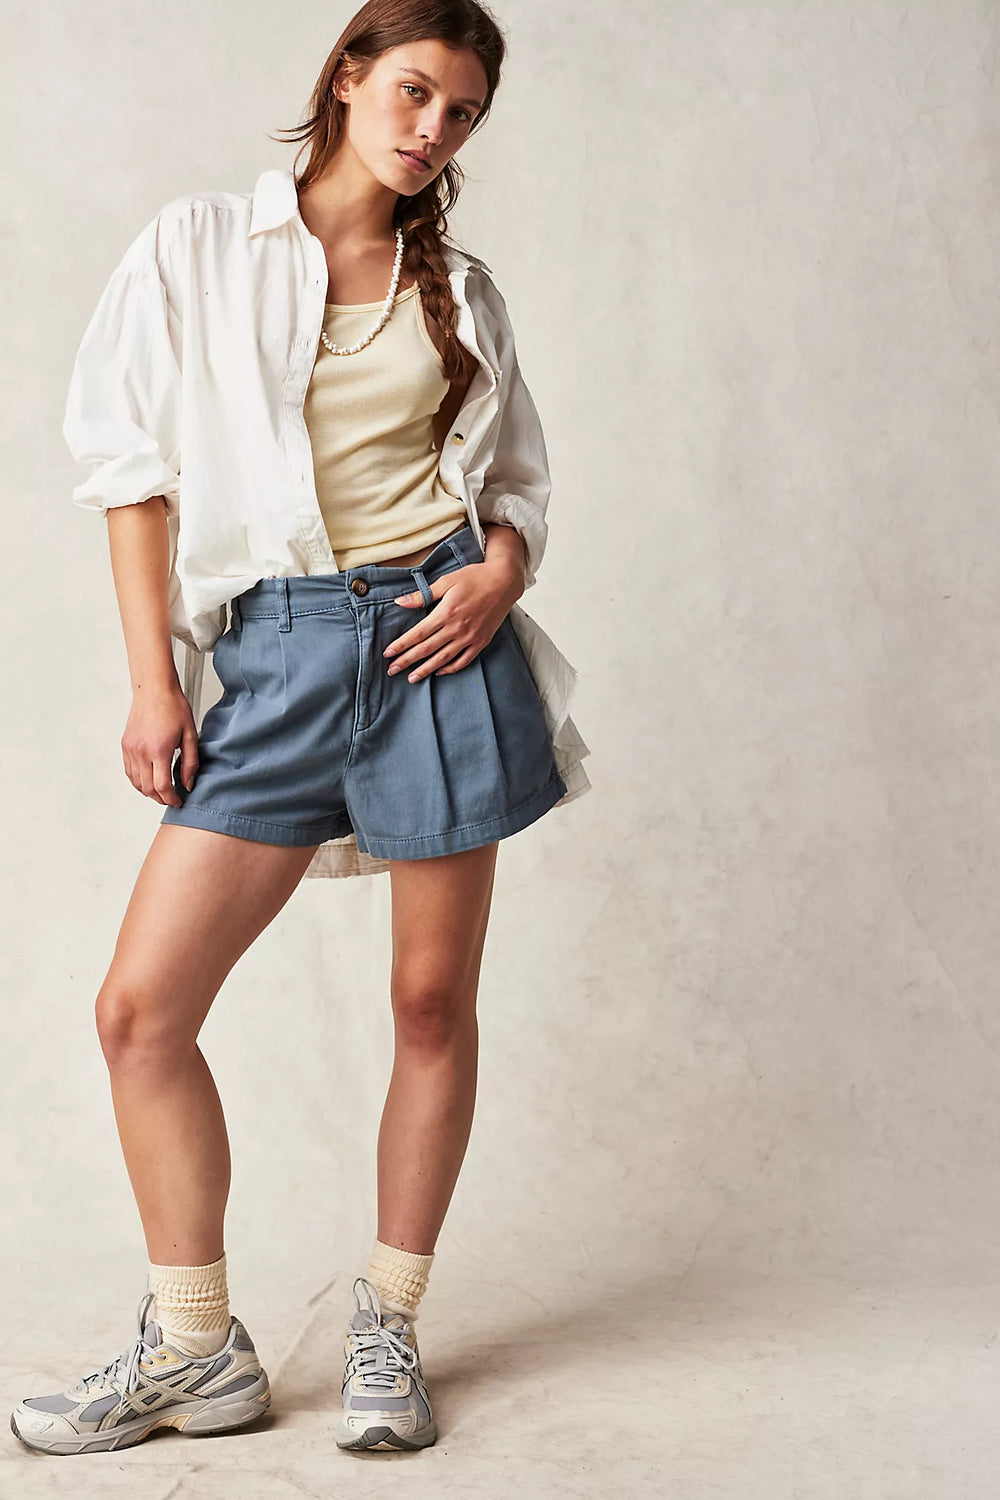 High-Rise Denim Shorts That Actually Look Good On Curvy Bodies